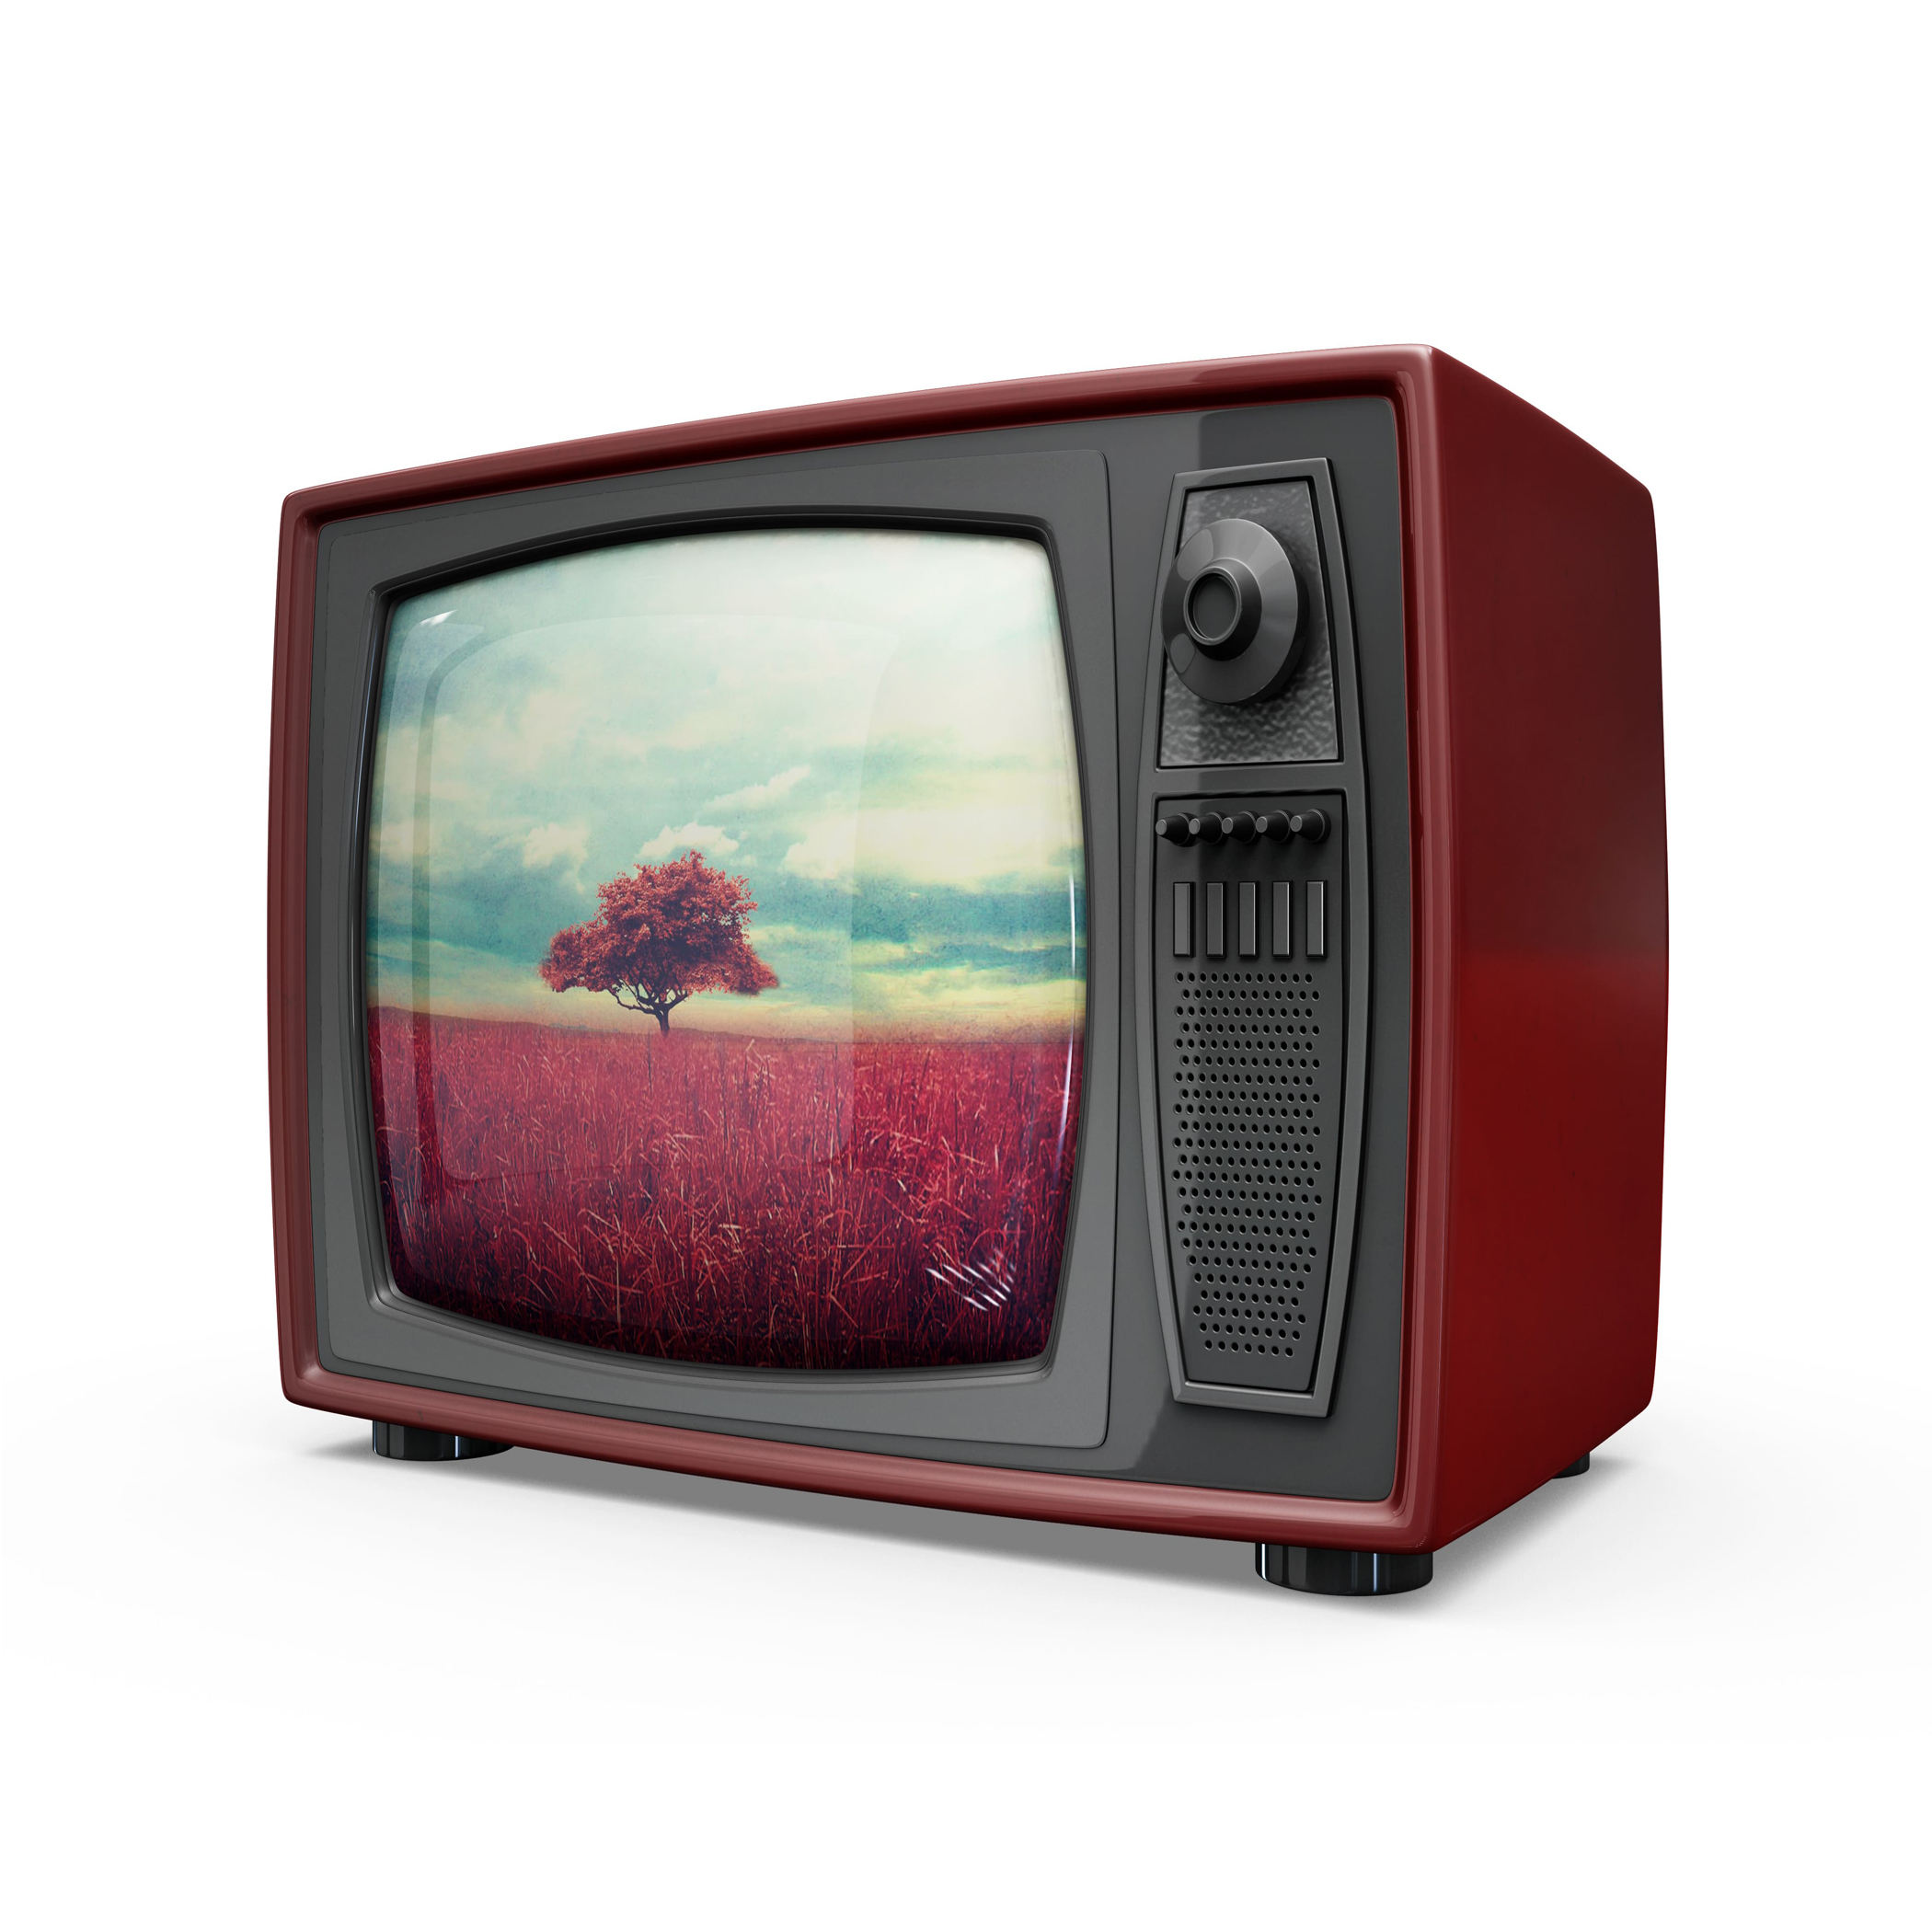 Read more about the article CRT’s- From No.1 Technology to Downfall.